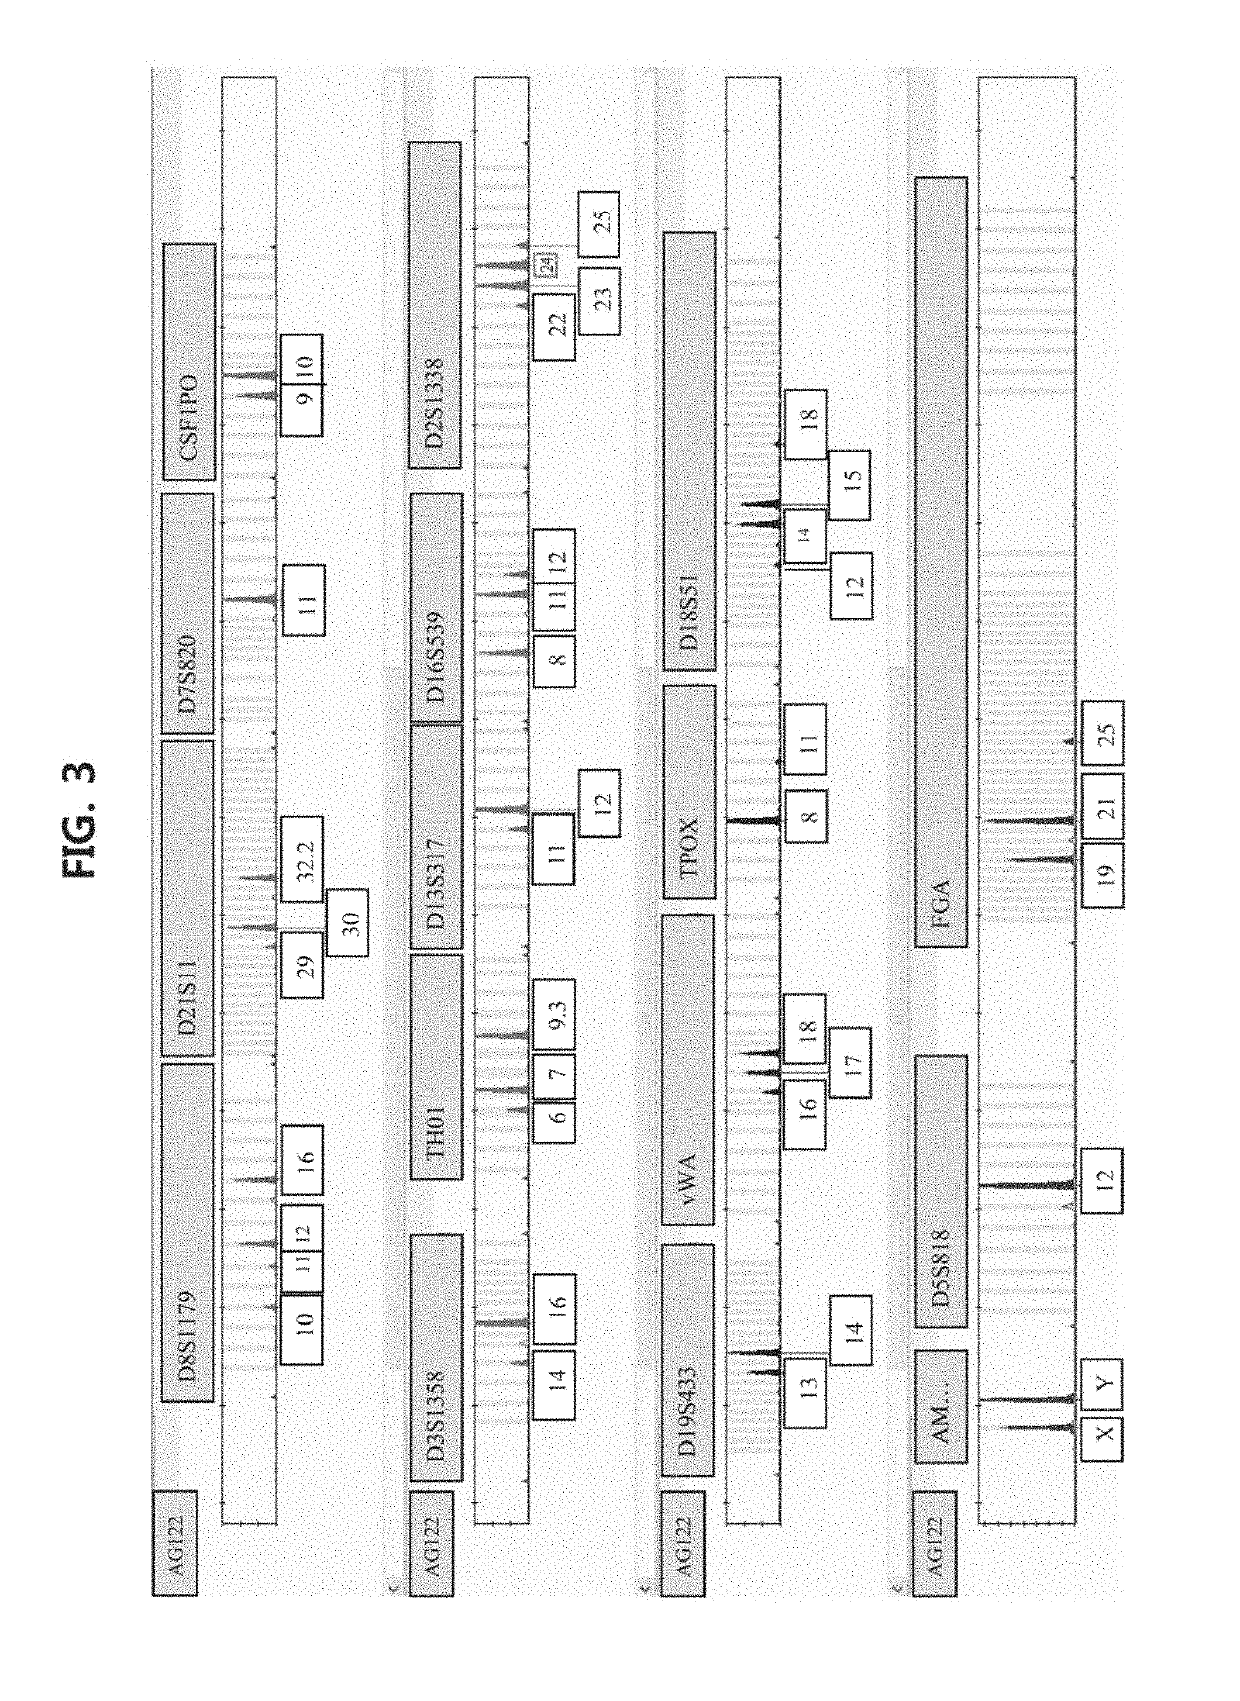 Method, apparatus and kit for human identification using polymer filter means for separation of sperm cells from biological samples that include other cell types